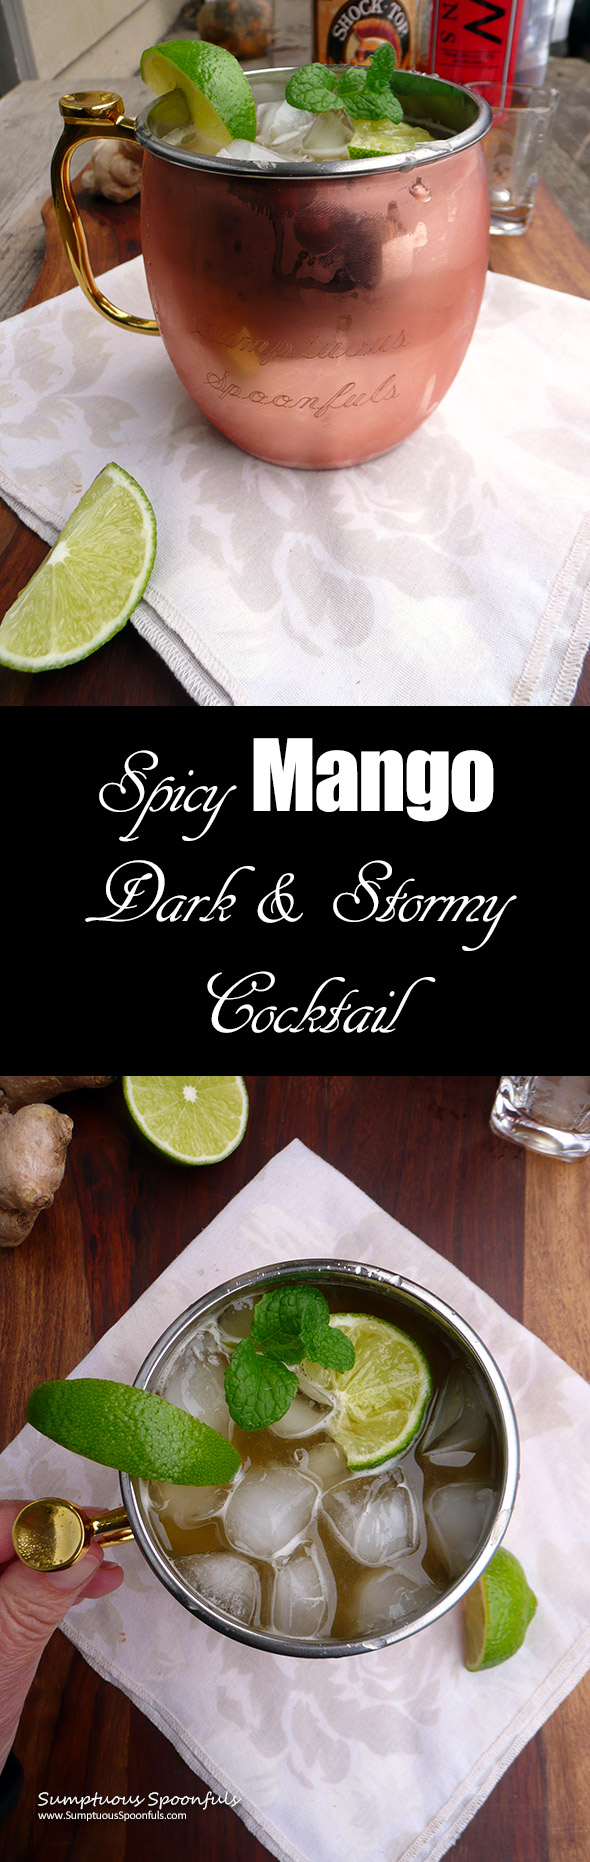 Spicy Mango Dark & Stormy Cocktail ~ Sumptuous Spoonfuls #cocktail #recipe